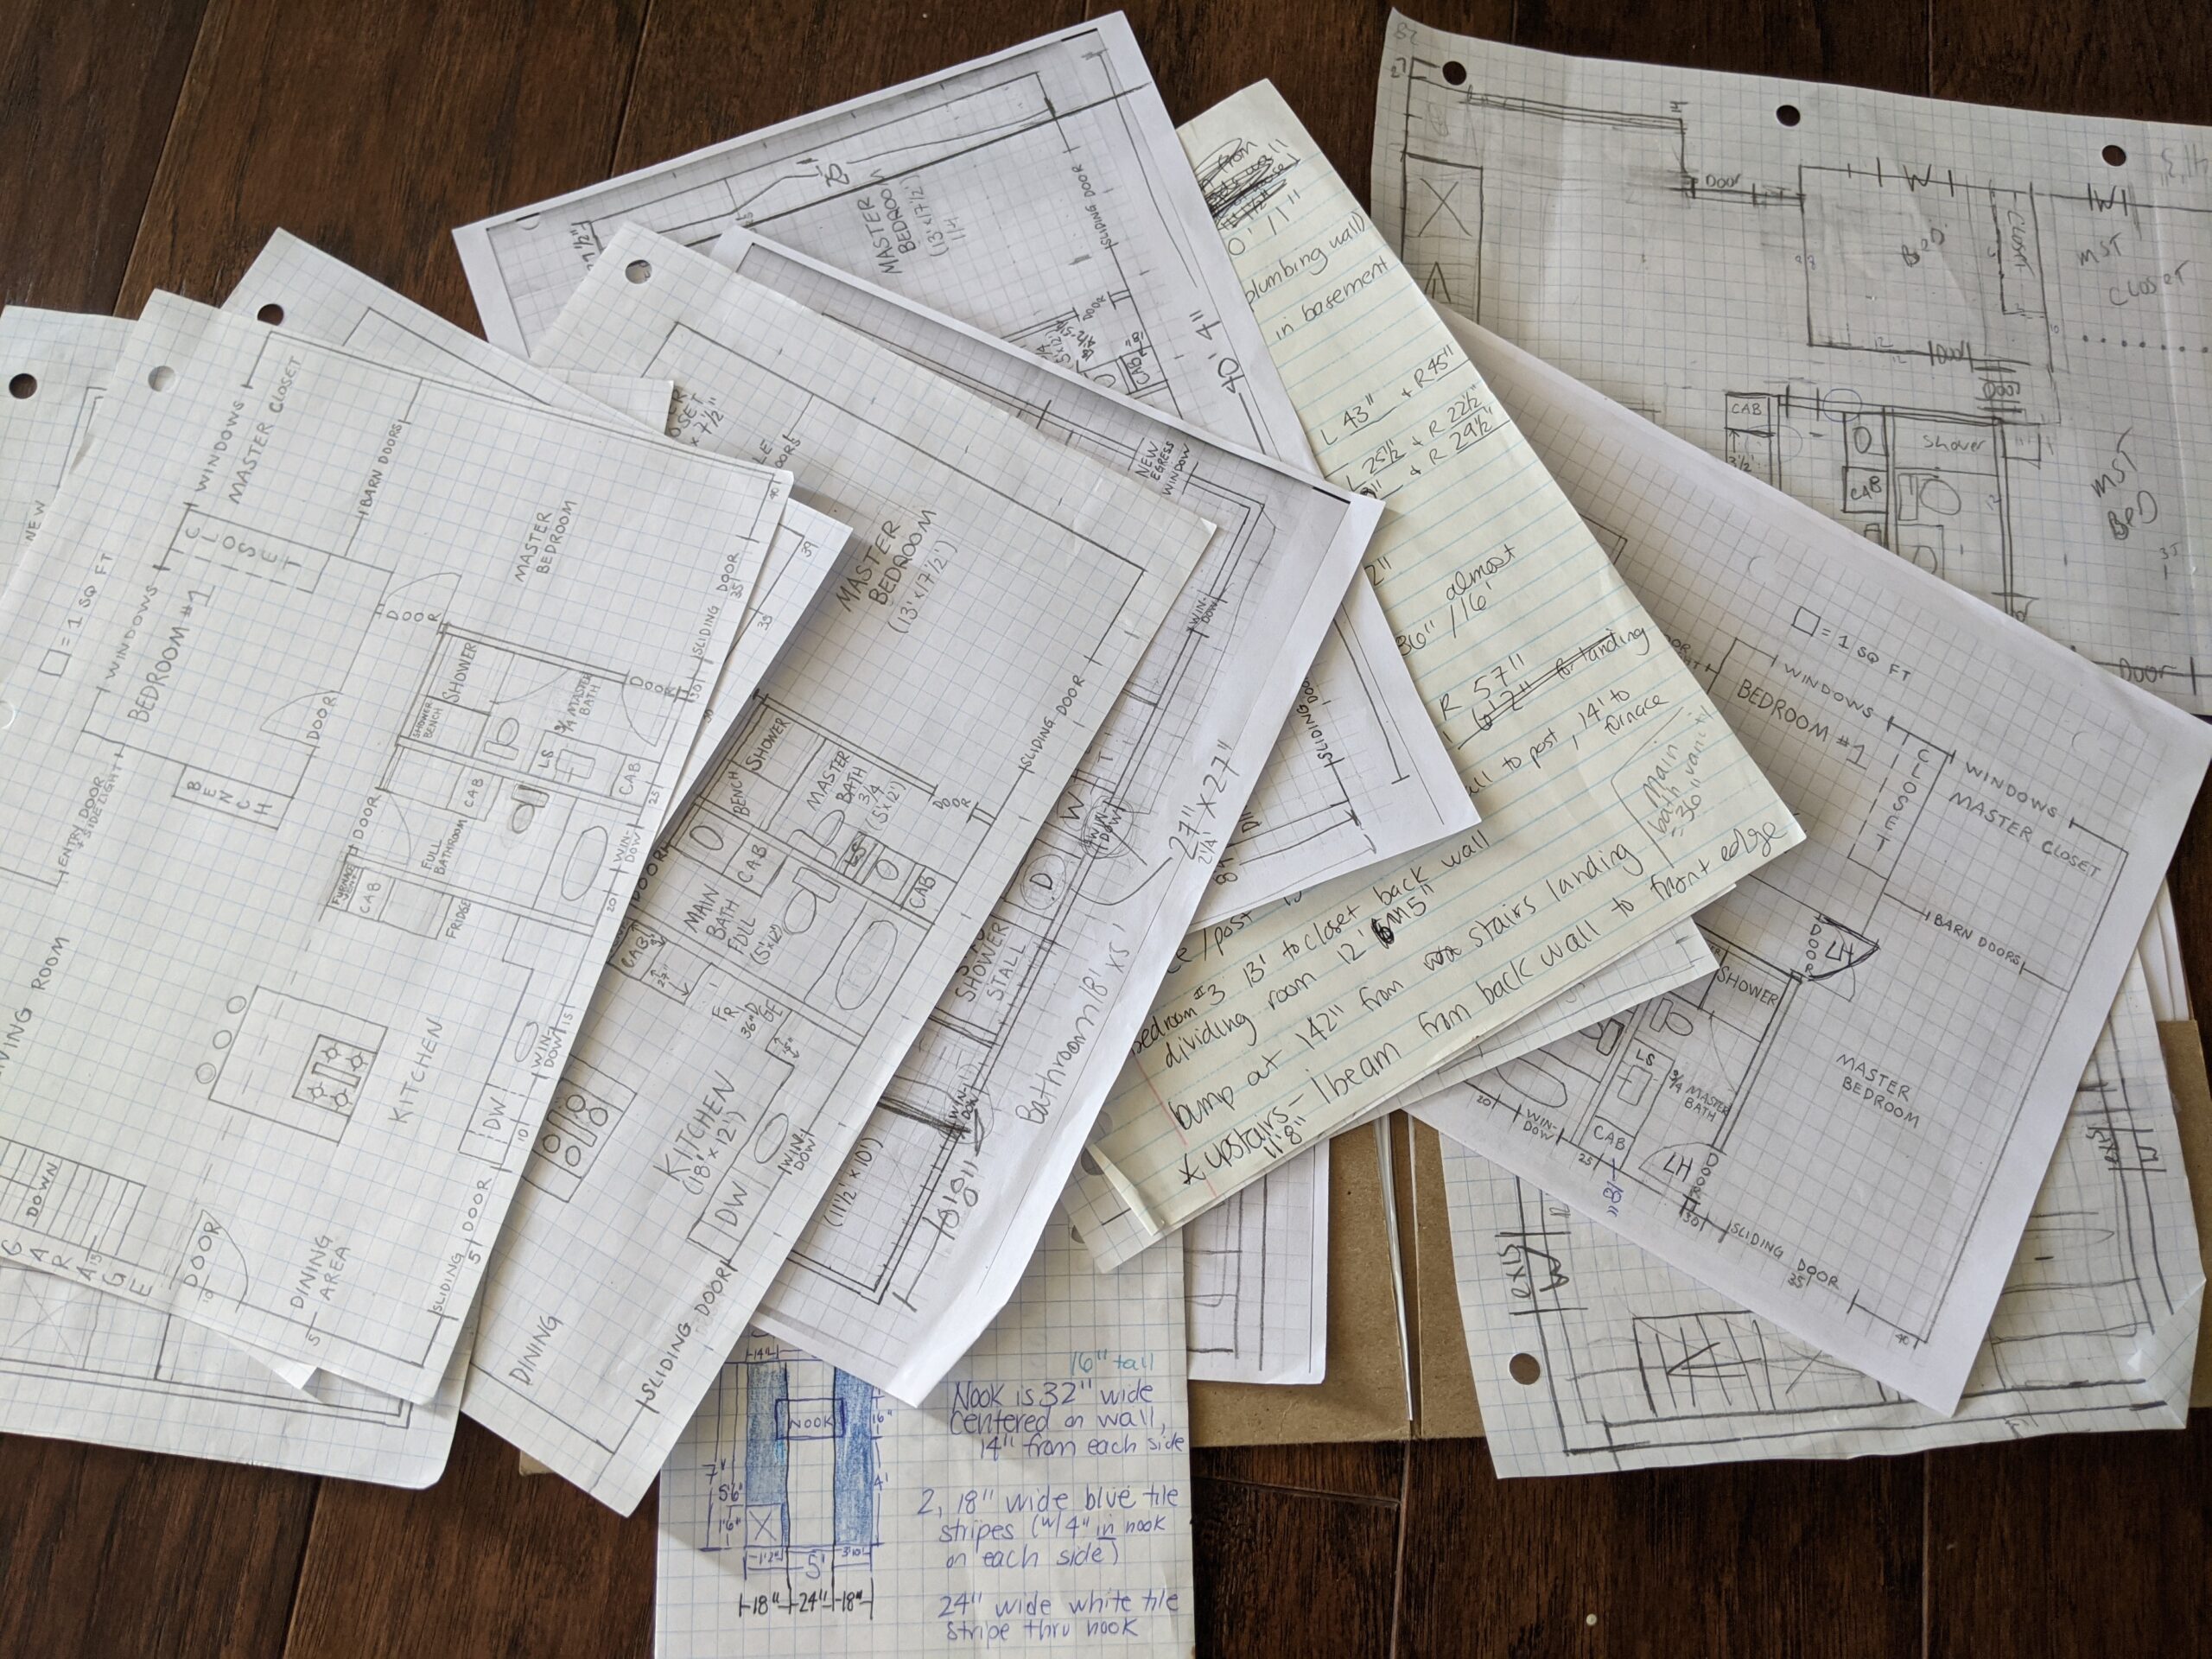 We made LOTS of drawings, lists, and plans to completely remodel our first home.